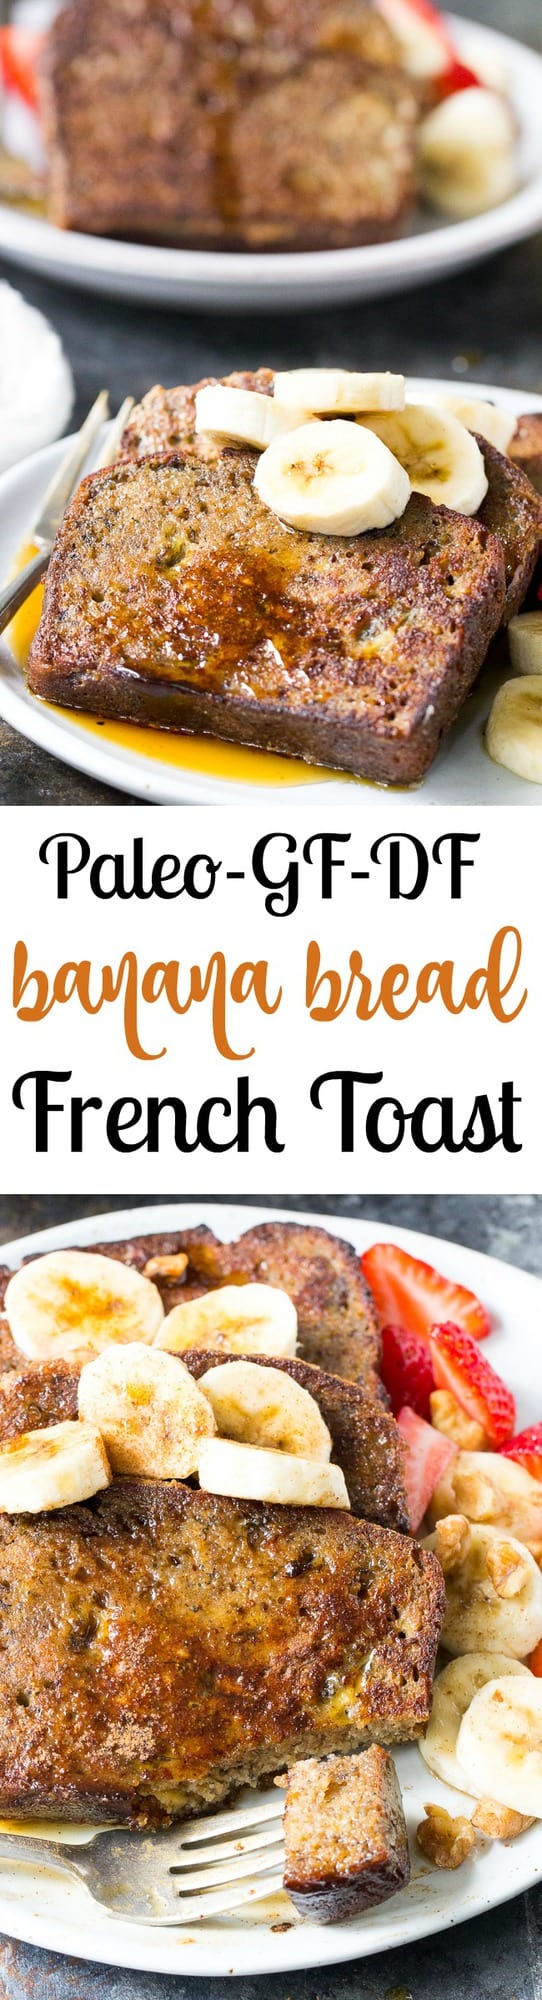 This Banana Bread French Toast is pure paleo breakfast comfort food!  Made with a hearty banana-sweetened grain free and paleo banana bread, it's perfect for a weekend breakfast treat when you're craving something indulgent.  Gluten free, dairy free, refined-sugar free.